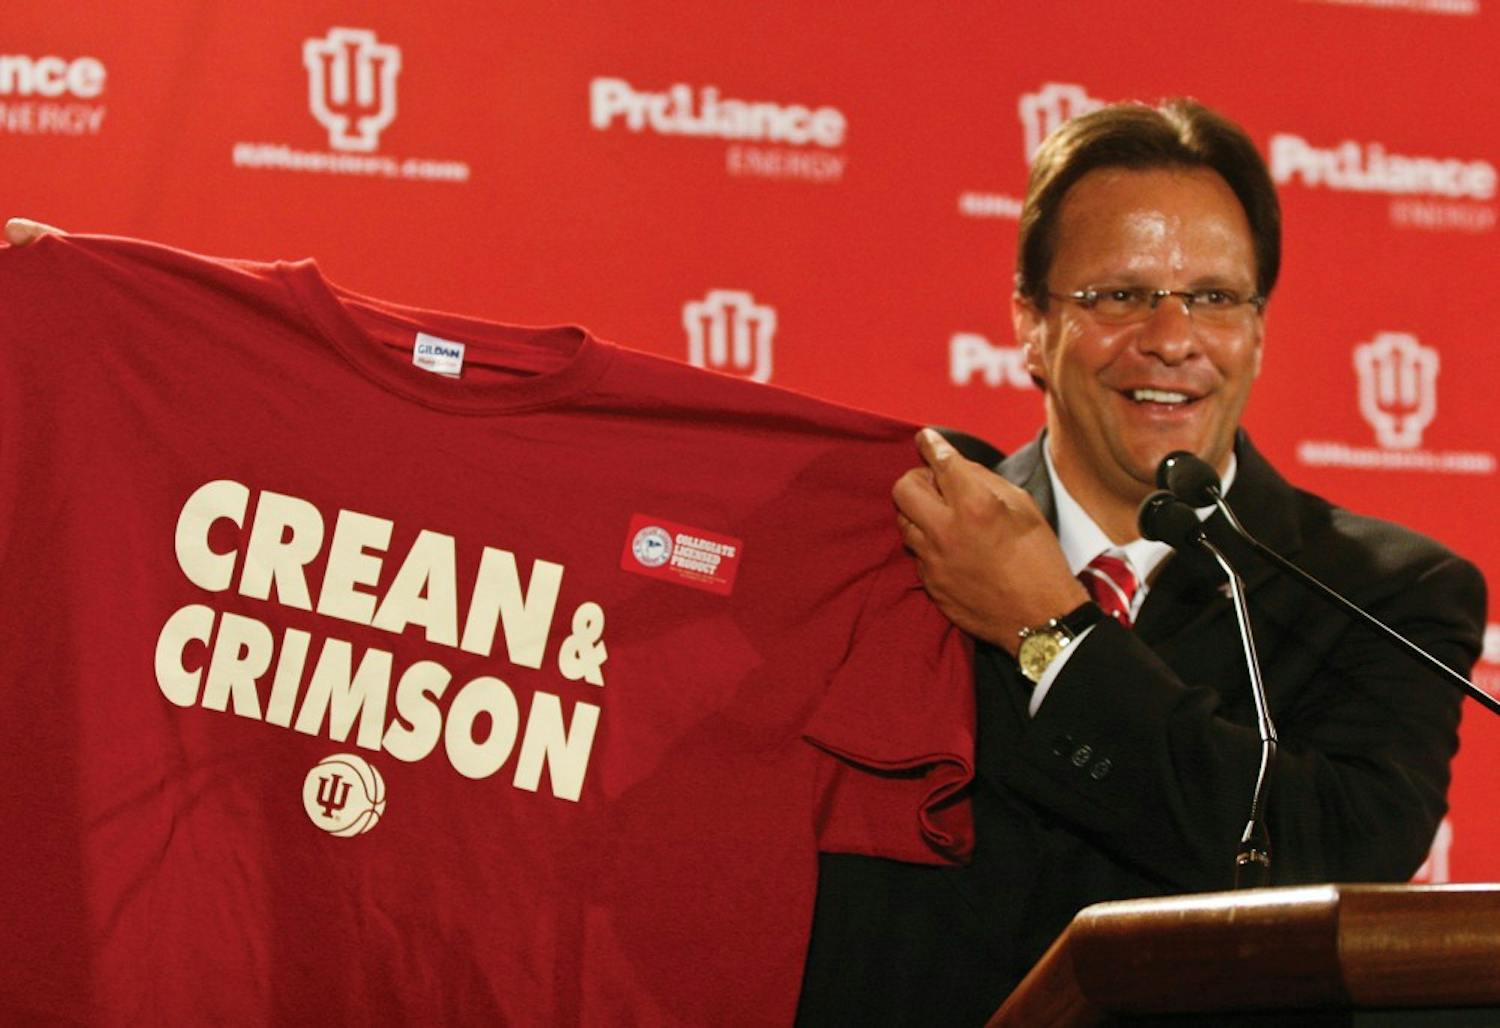 Jacob Kriese • IDS
New IU head coach Tom Crean holds a T-shirt that says "Crean & Crimson" during a press conference Wednesday afternoon in the Hoosier Room. Crean was hired Wednesday after a two week search.